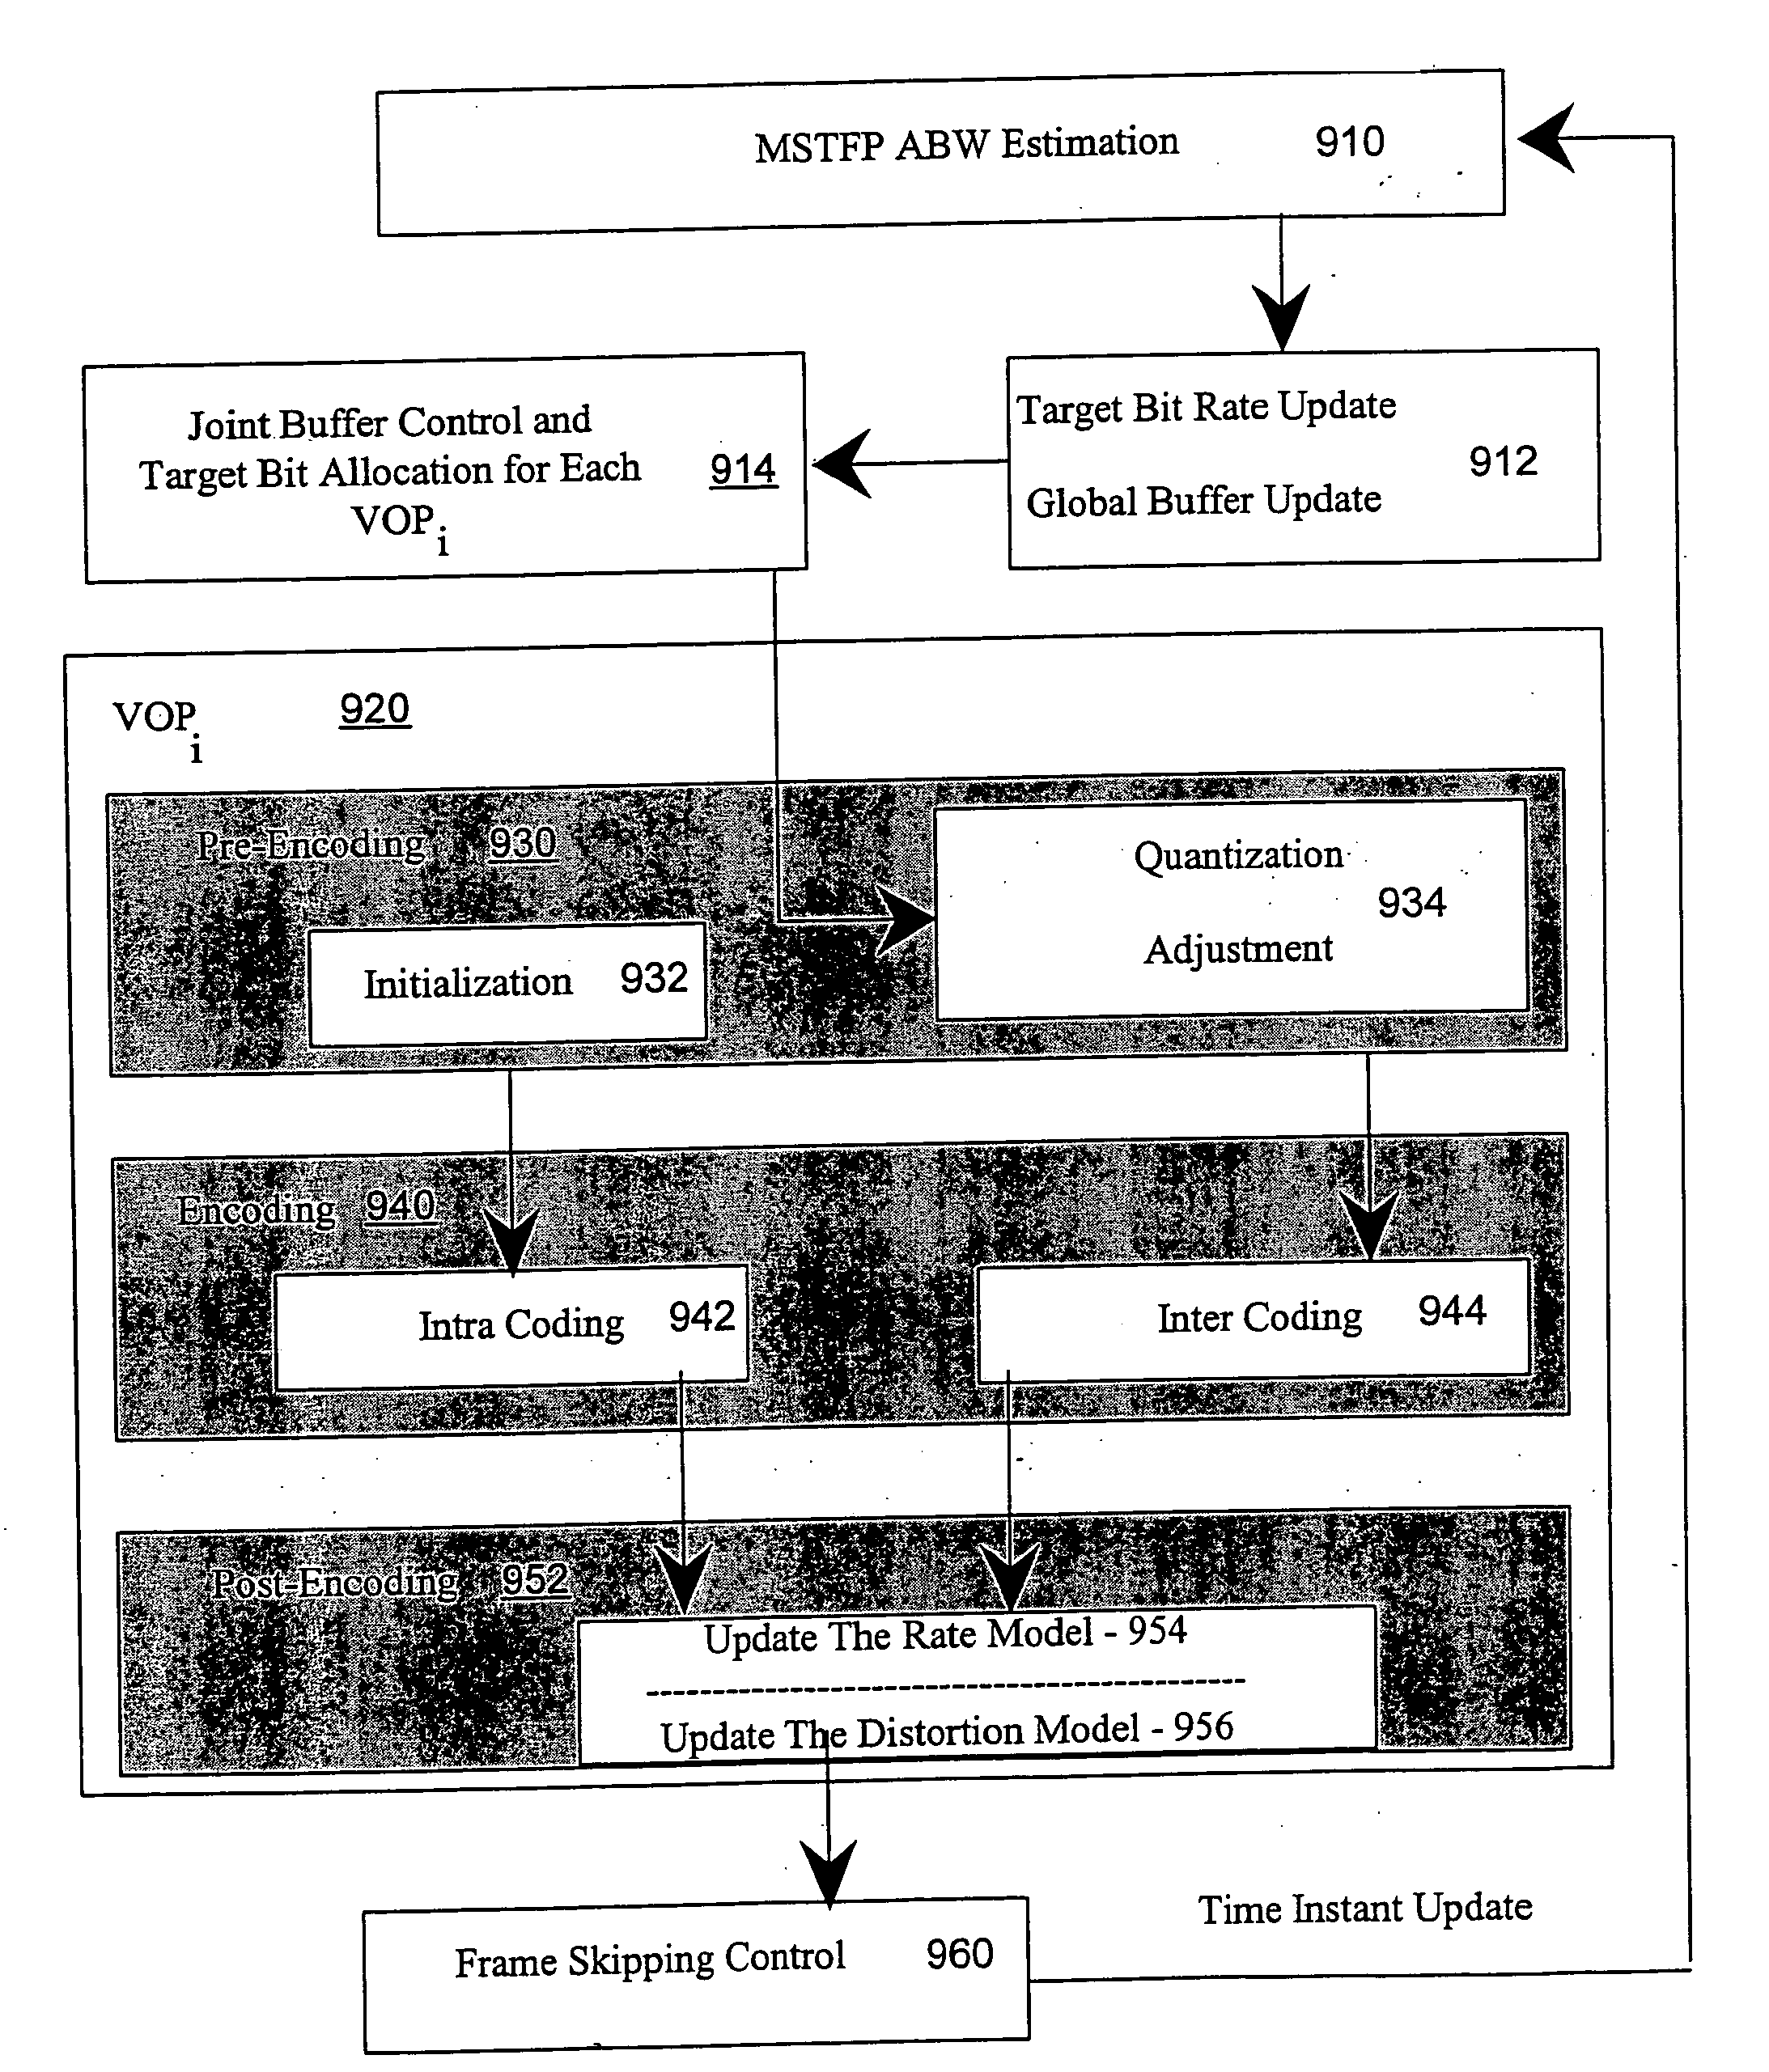 Resource allocation in multi-stream IP network for optimized quality of service